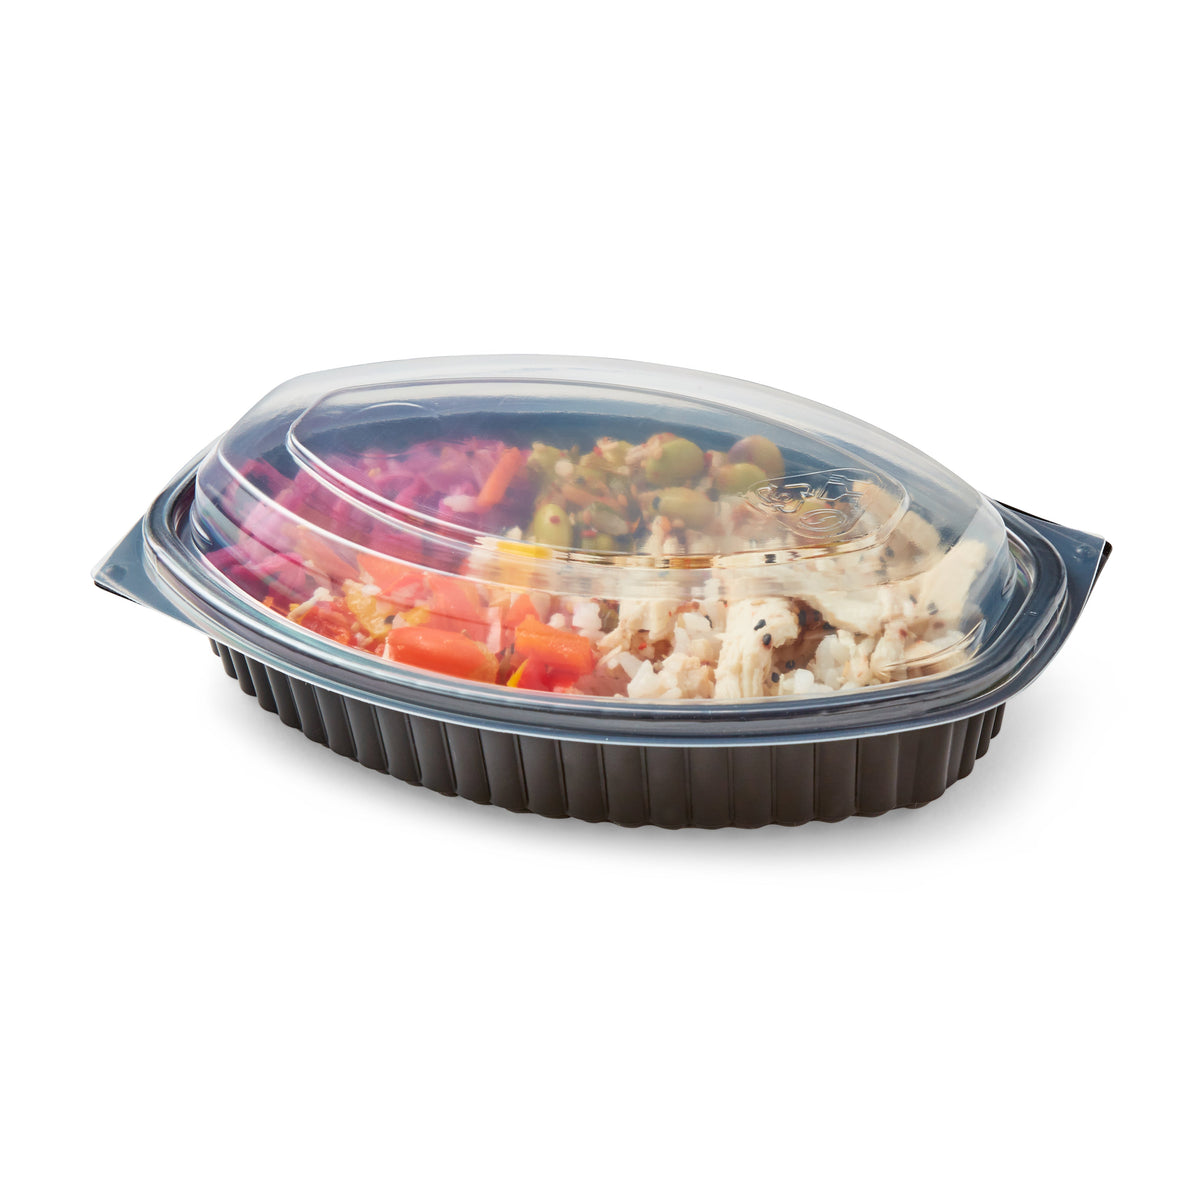 30 x 520 ml (18.3 ounce) Microwavable Meal Prep Hot Food Containers & Lids (207mm x 143mm x 59mm)